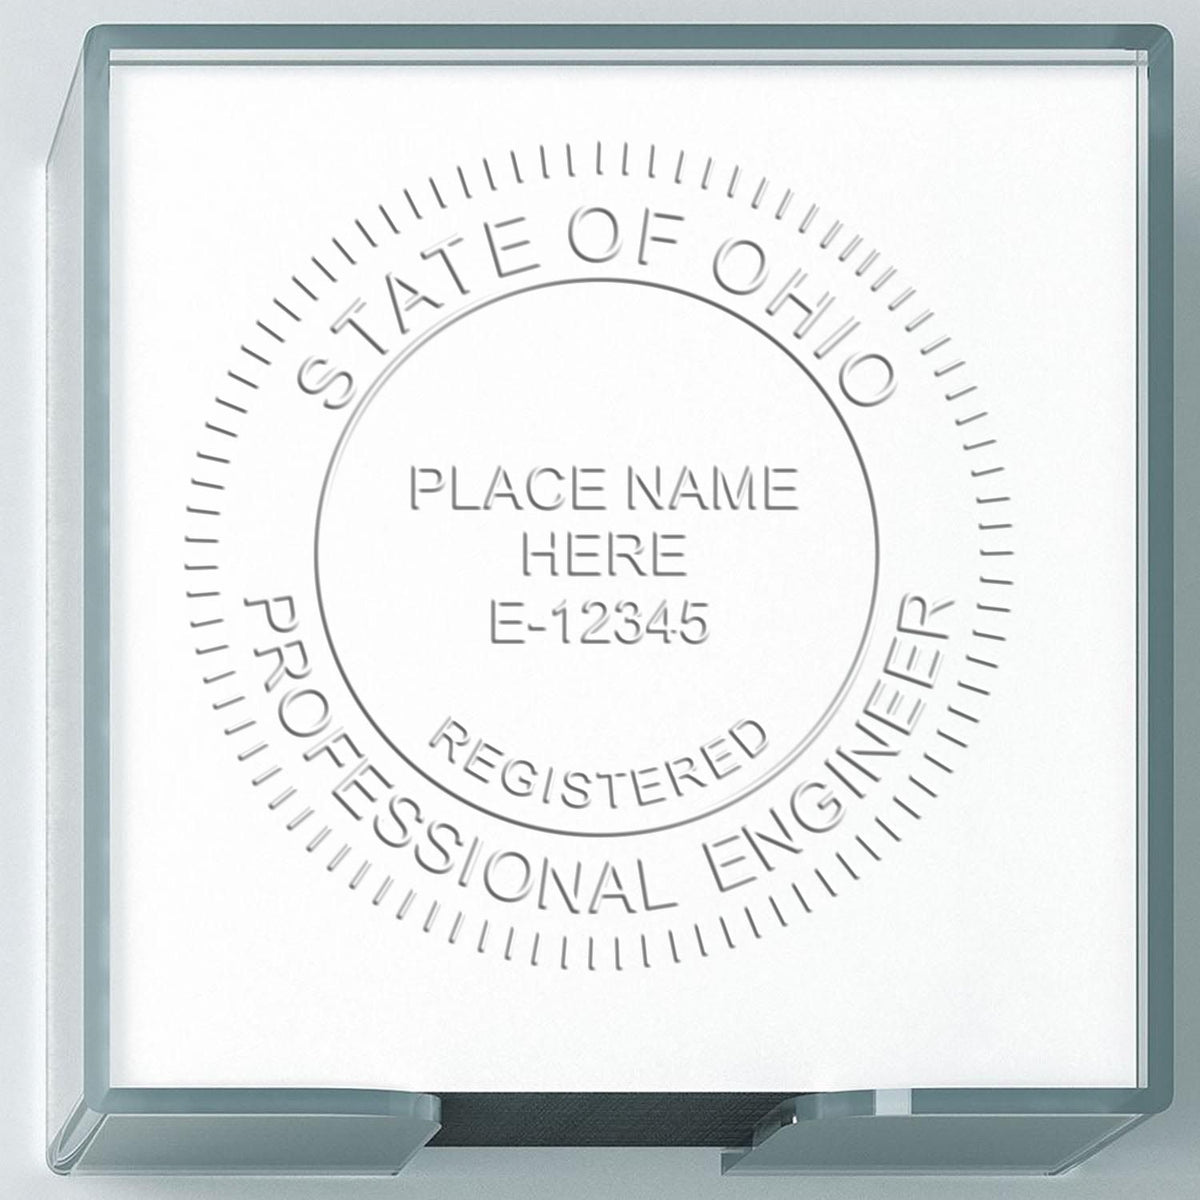 A stamped impression of the Long Reach Ohio PE Seal in this stylish lifestyle photo, setting the tone for a unique and personalized product.